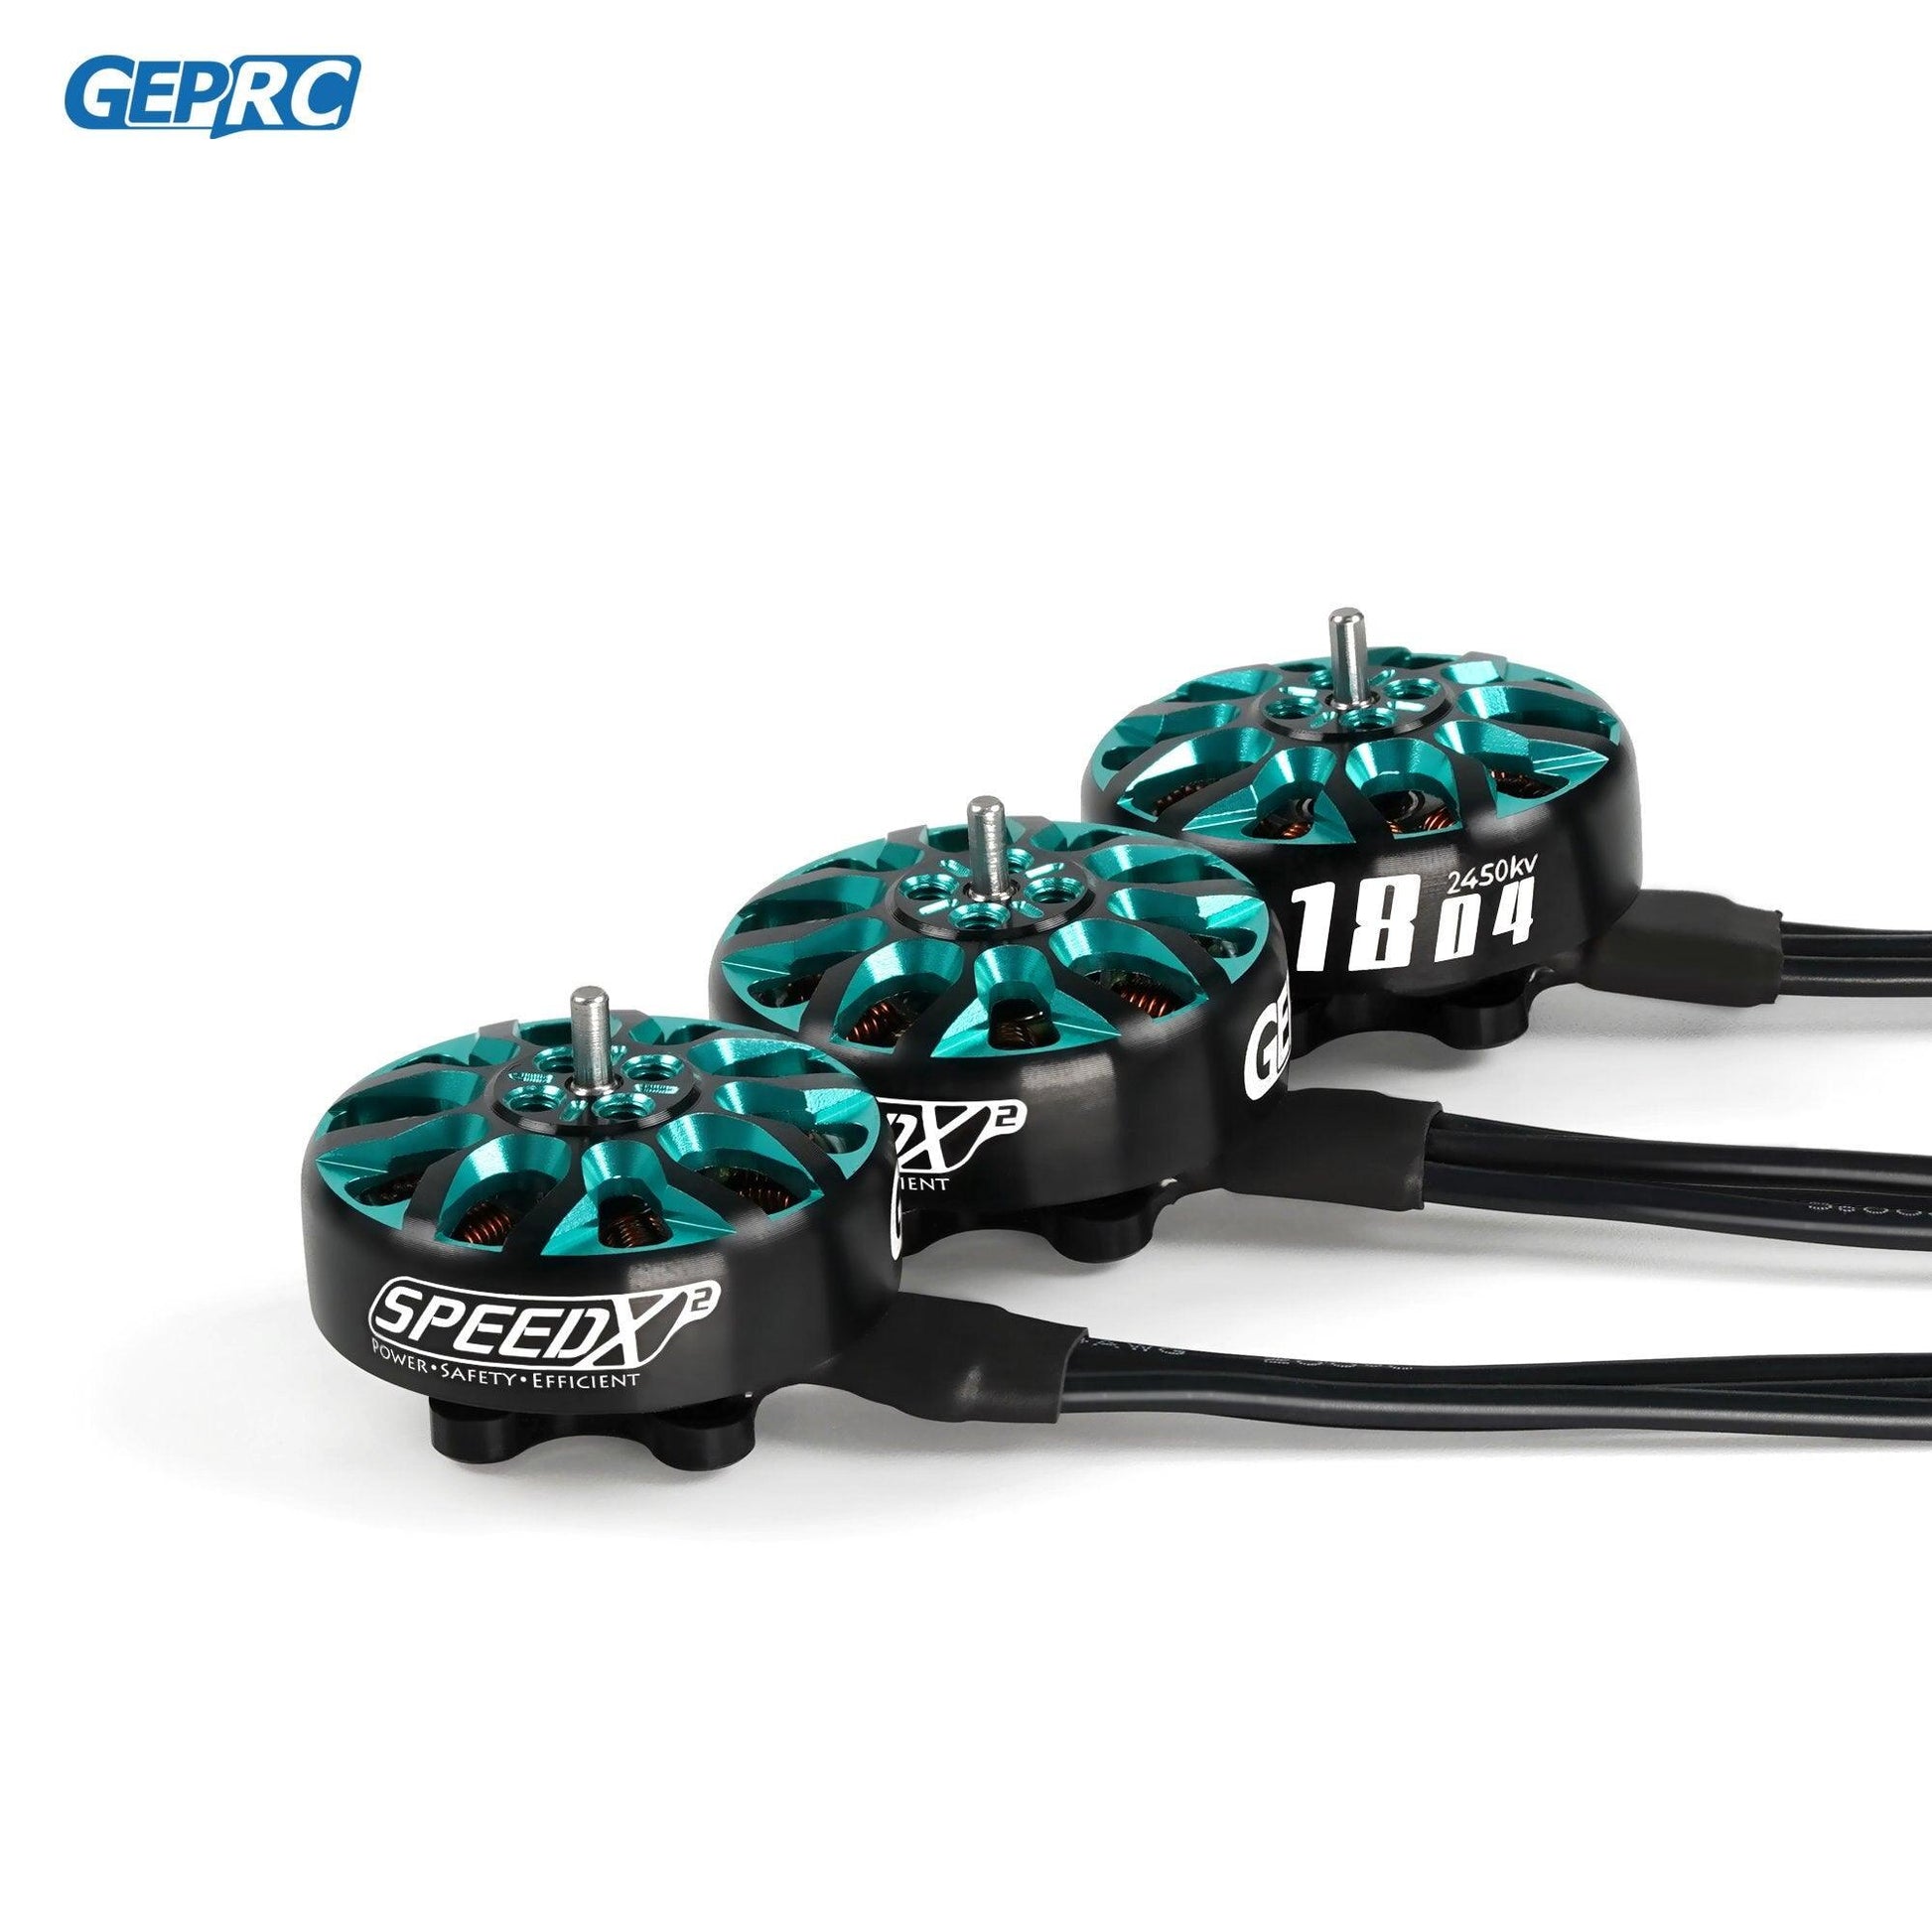 GEPRC SPEEDX2 1804 2450KV 3450KV Motor 4S 6S Rushless Motor for FPV RC Multicopter Racing Drone Parts DIY PARTS - RCDrone